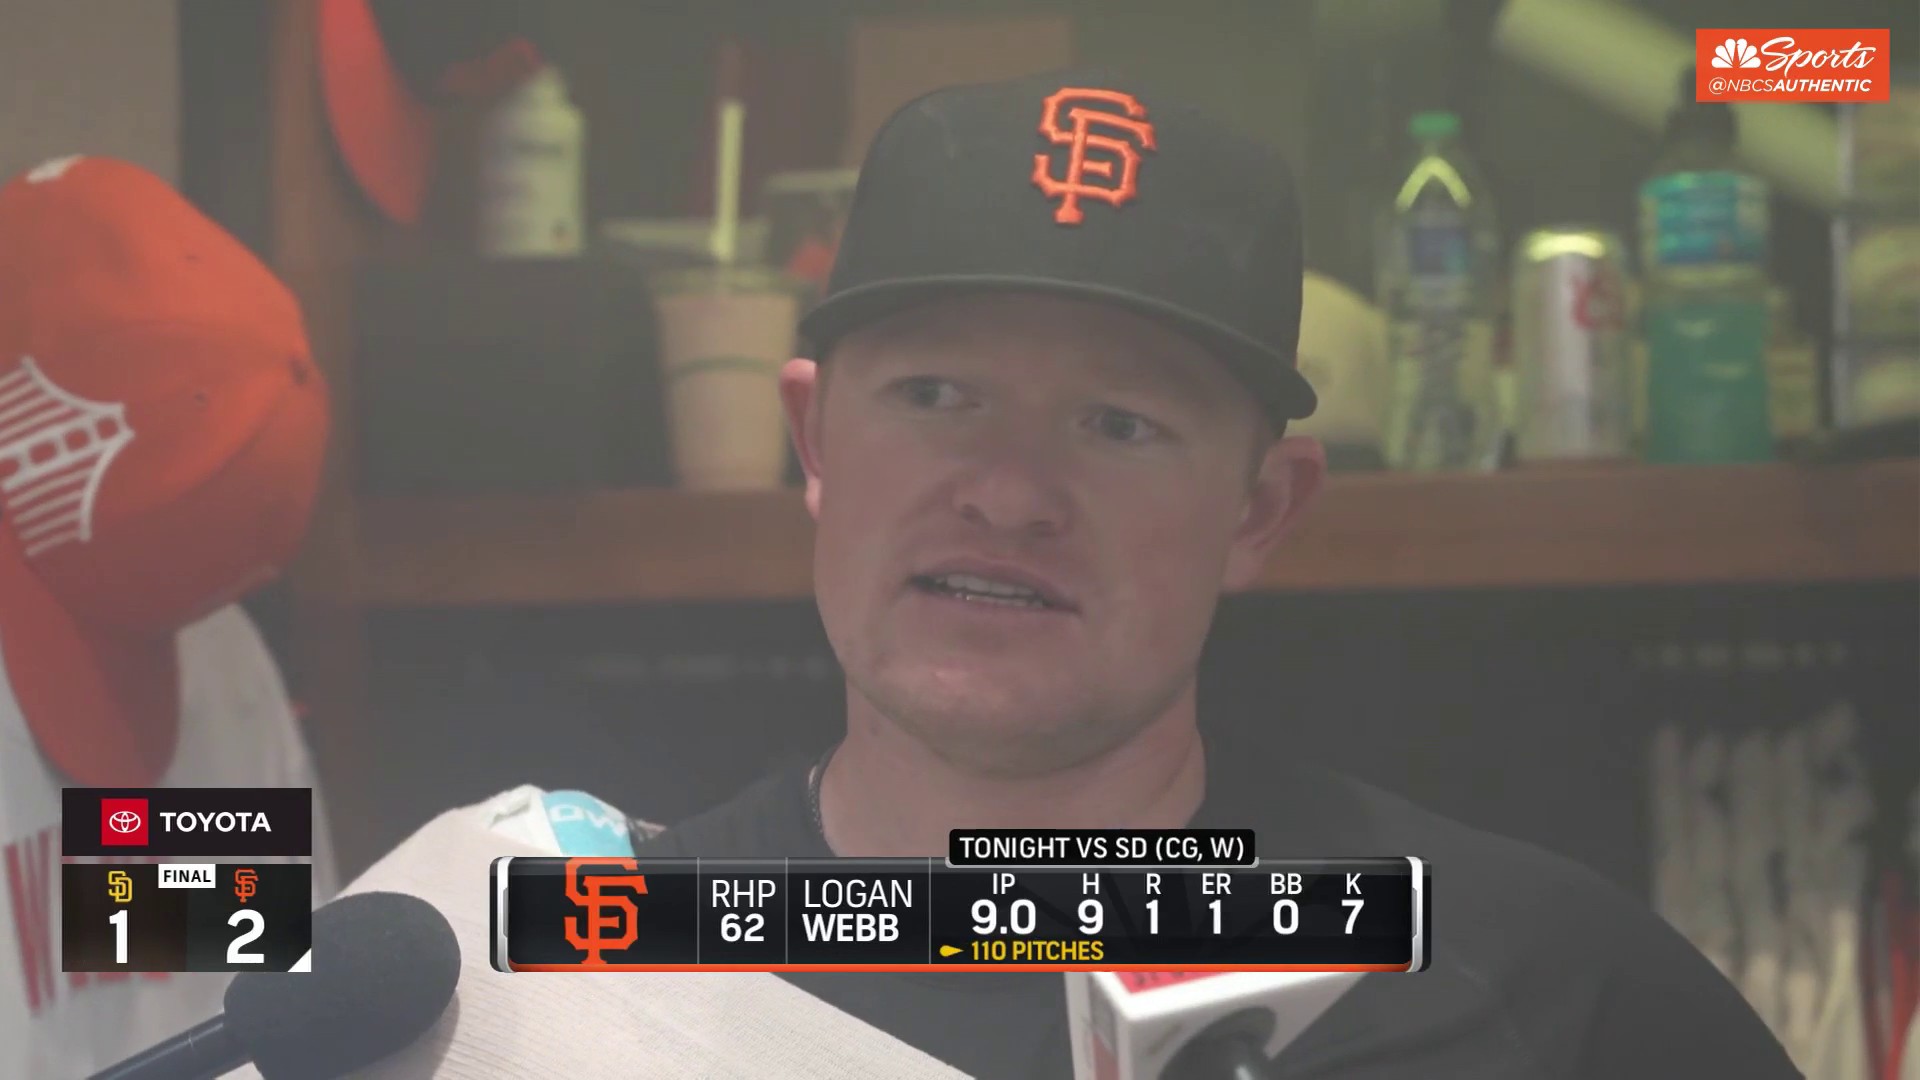 Giants should be embarrassed after wasting Logan Webb's tremendous